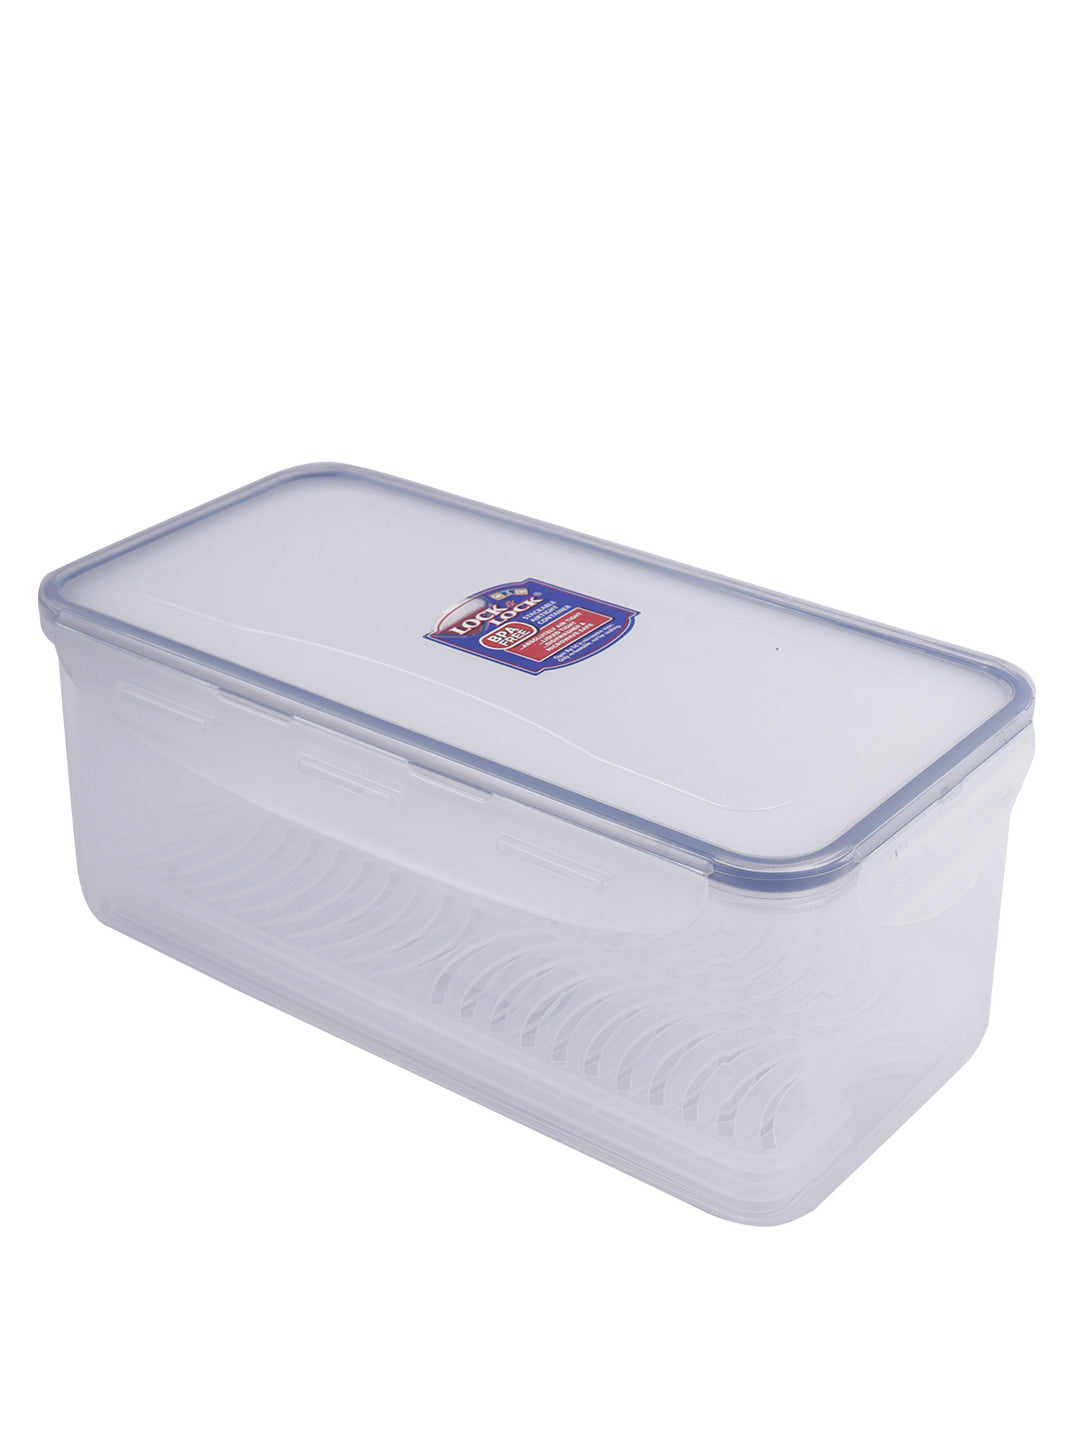 LocknLock Classics Large Flat Oblong Food Container with Tray, Transparent